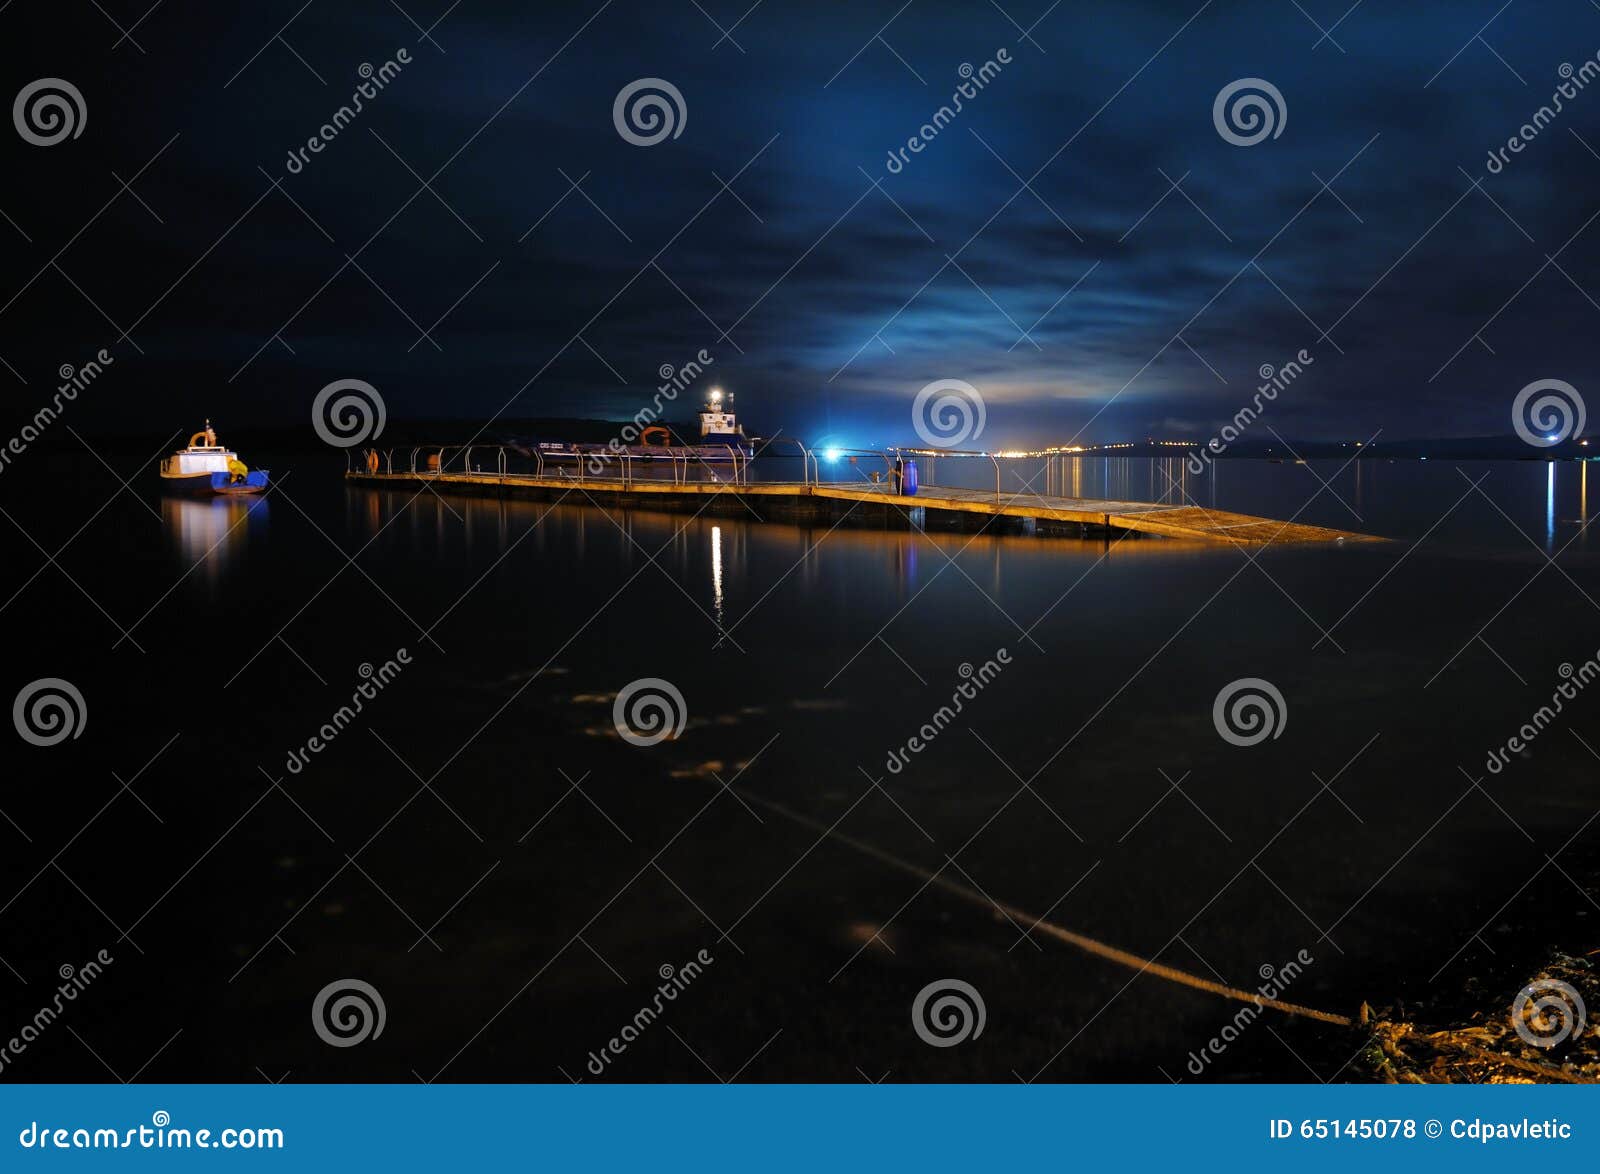 night view of calen floating dock, calen, chiloe, chile